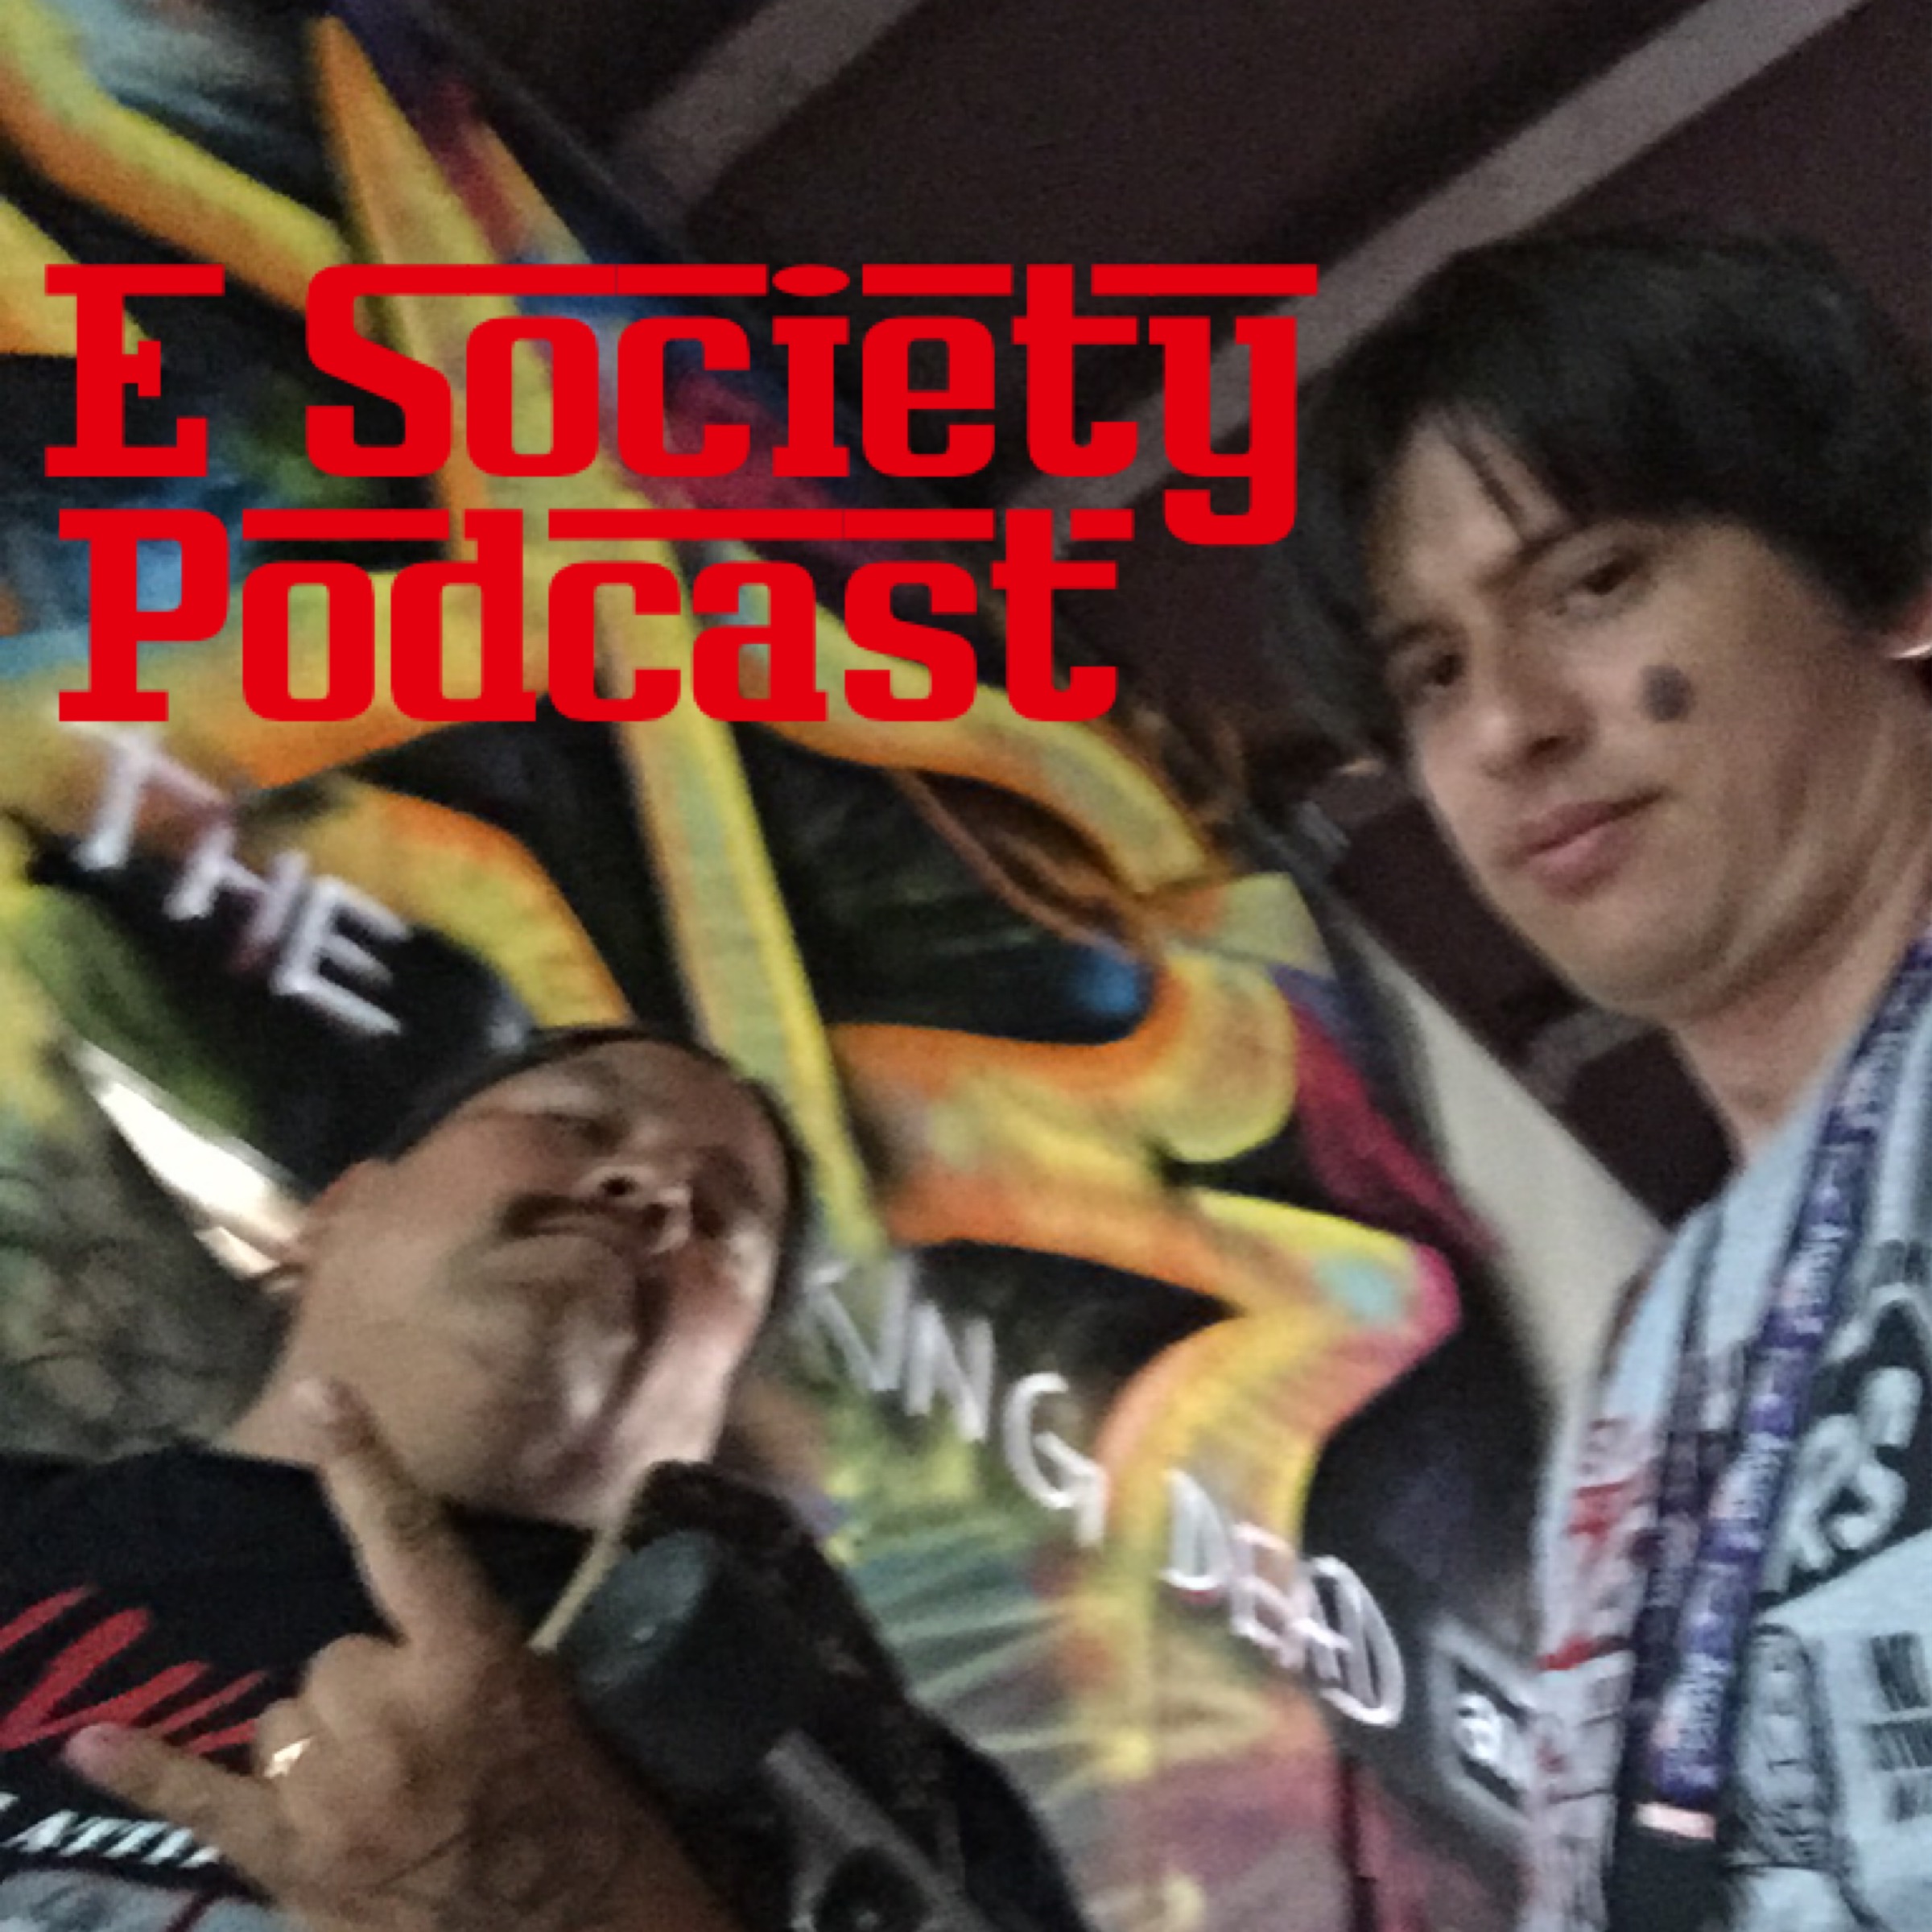 E Society Podcast - Ep. 93: From the Command Center